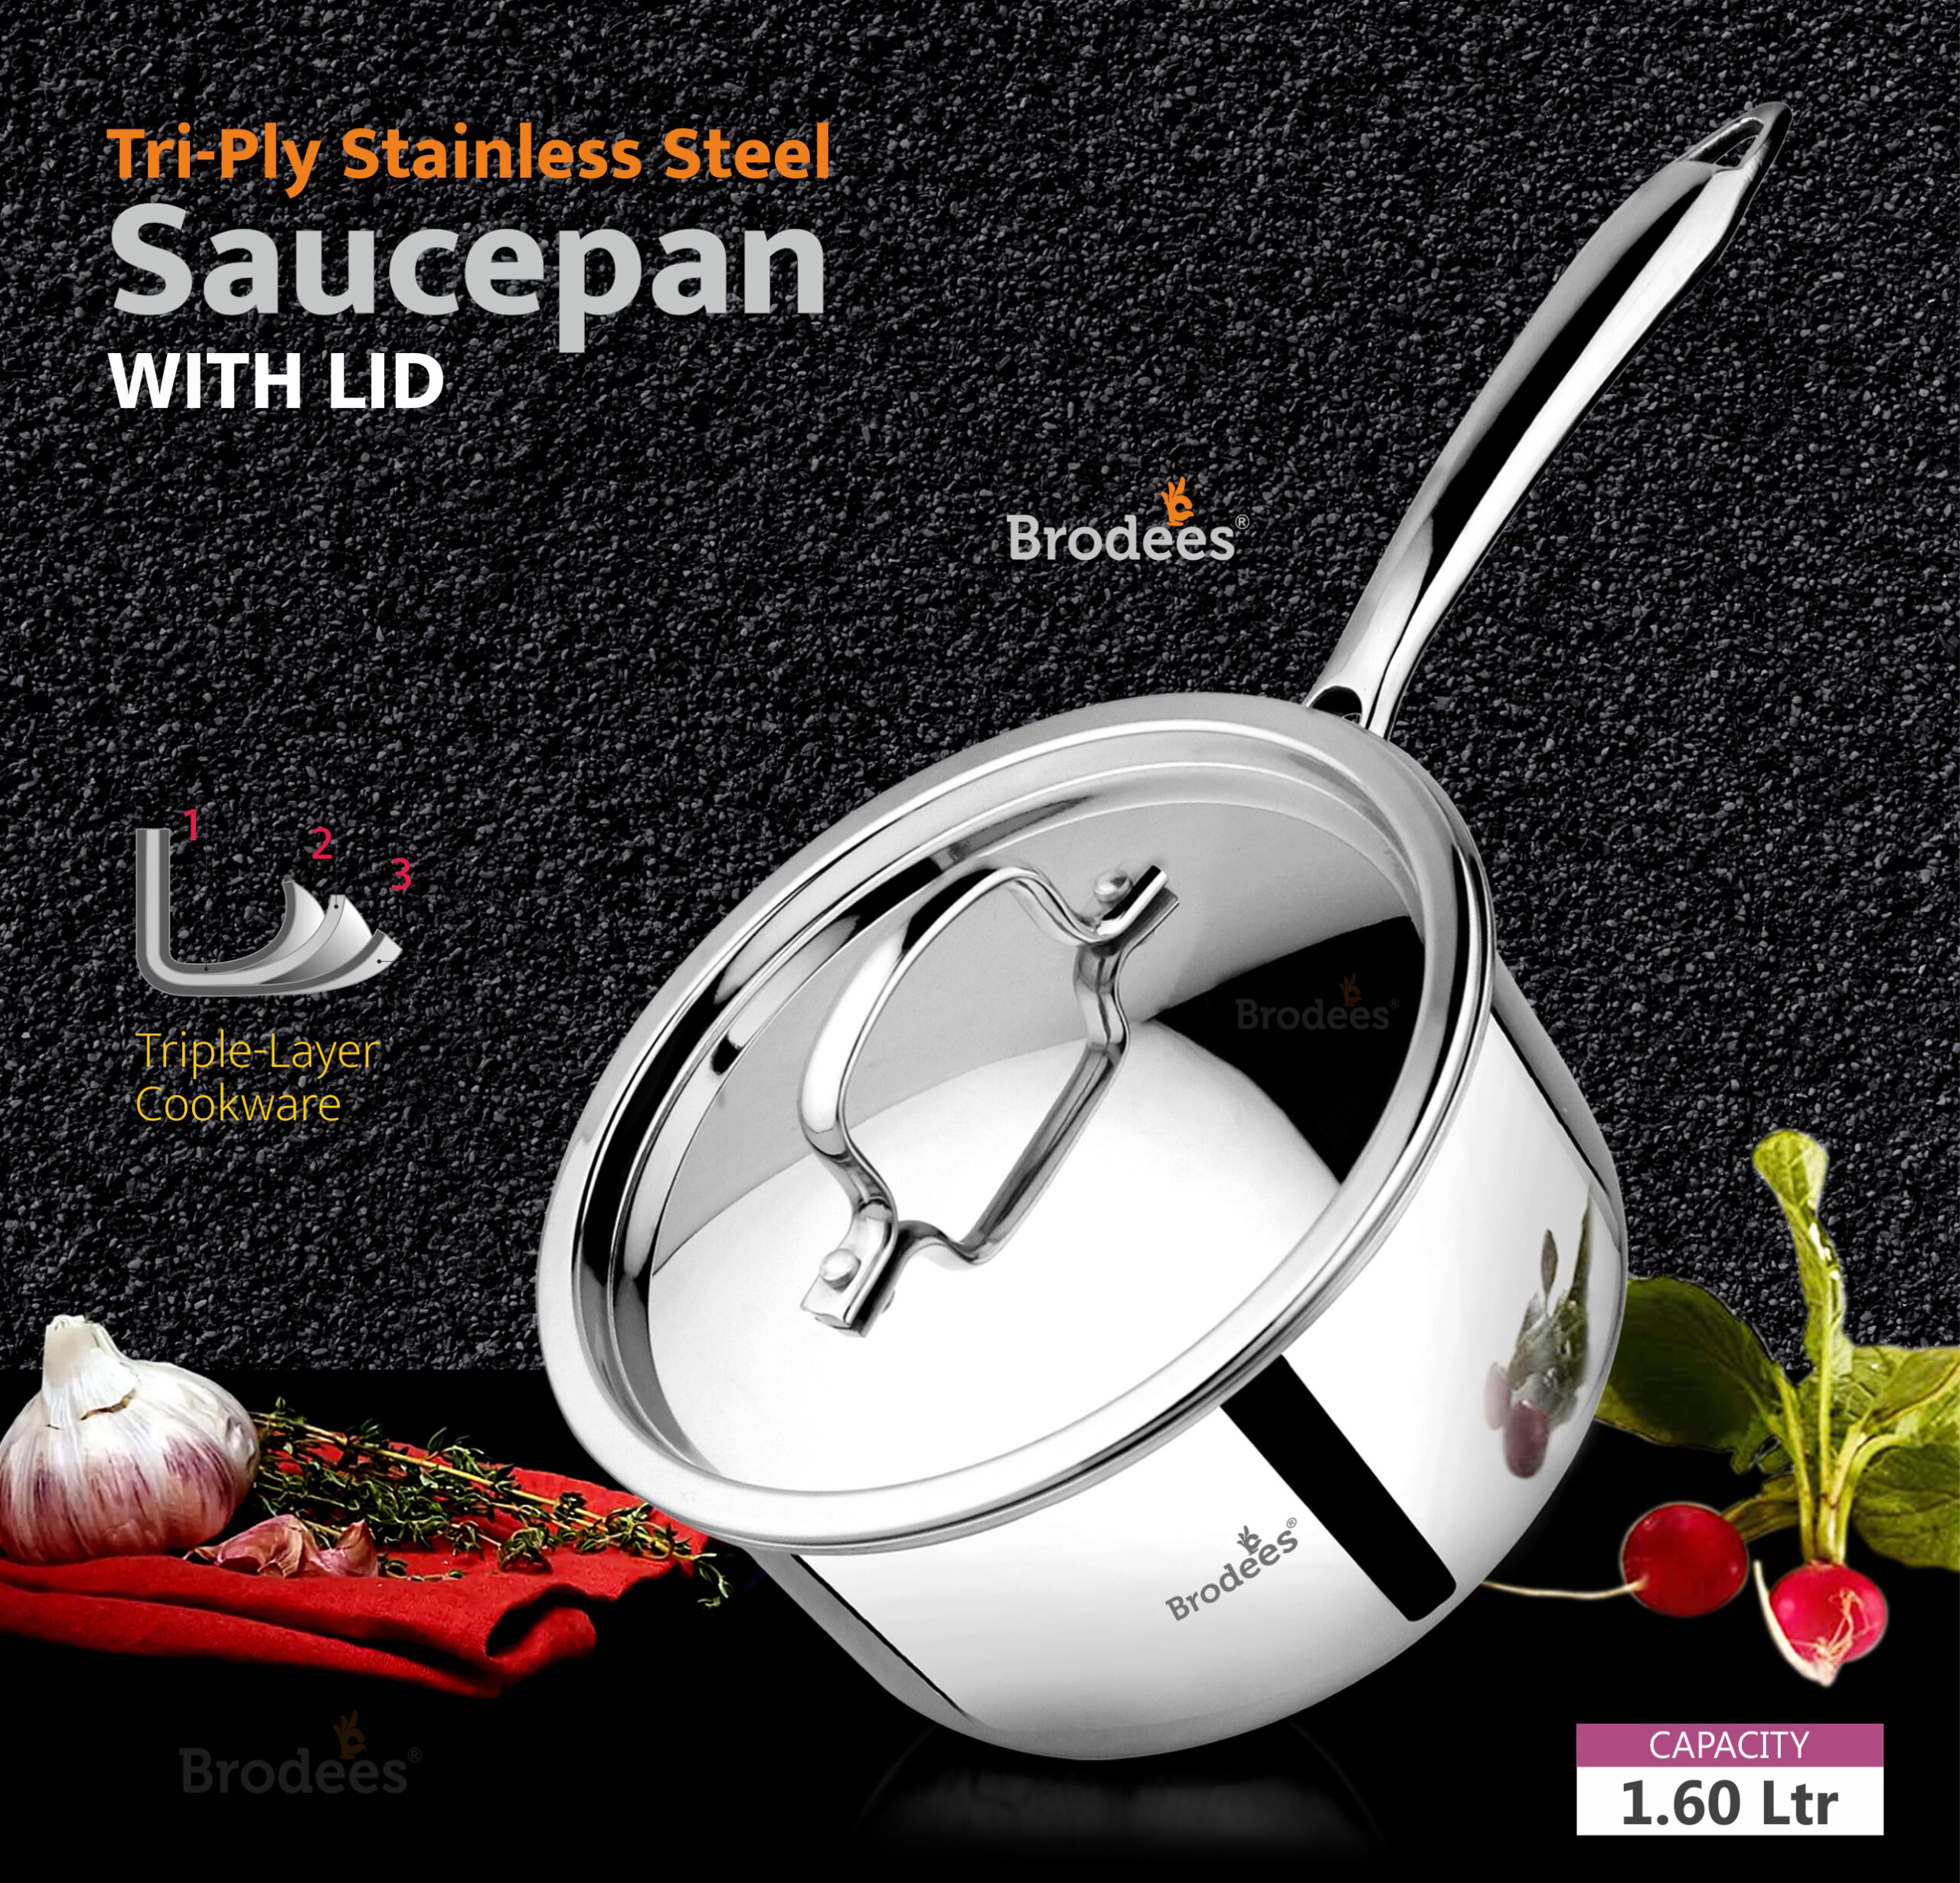 Tri-Ply Stainless Steel Sauce Pan with SS Lid | 17.5 cm Diameter - 1.60 Litre (2)